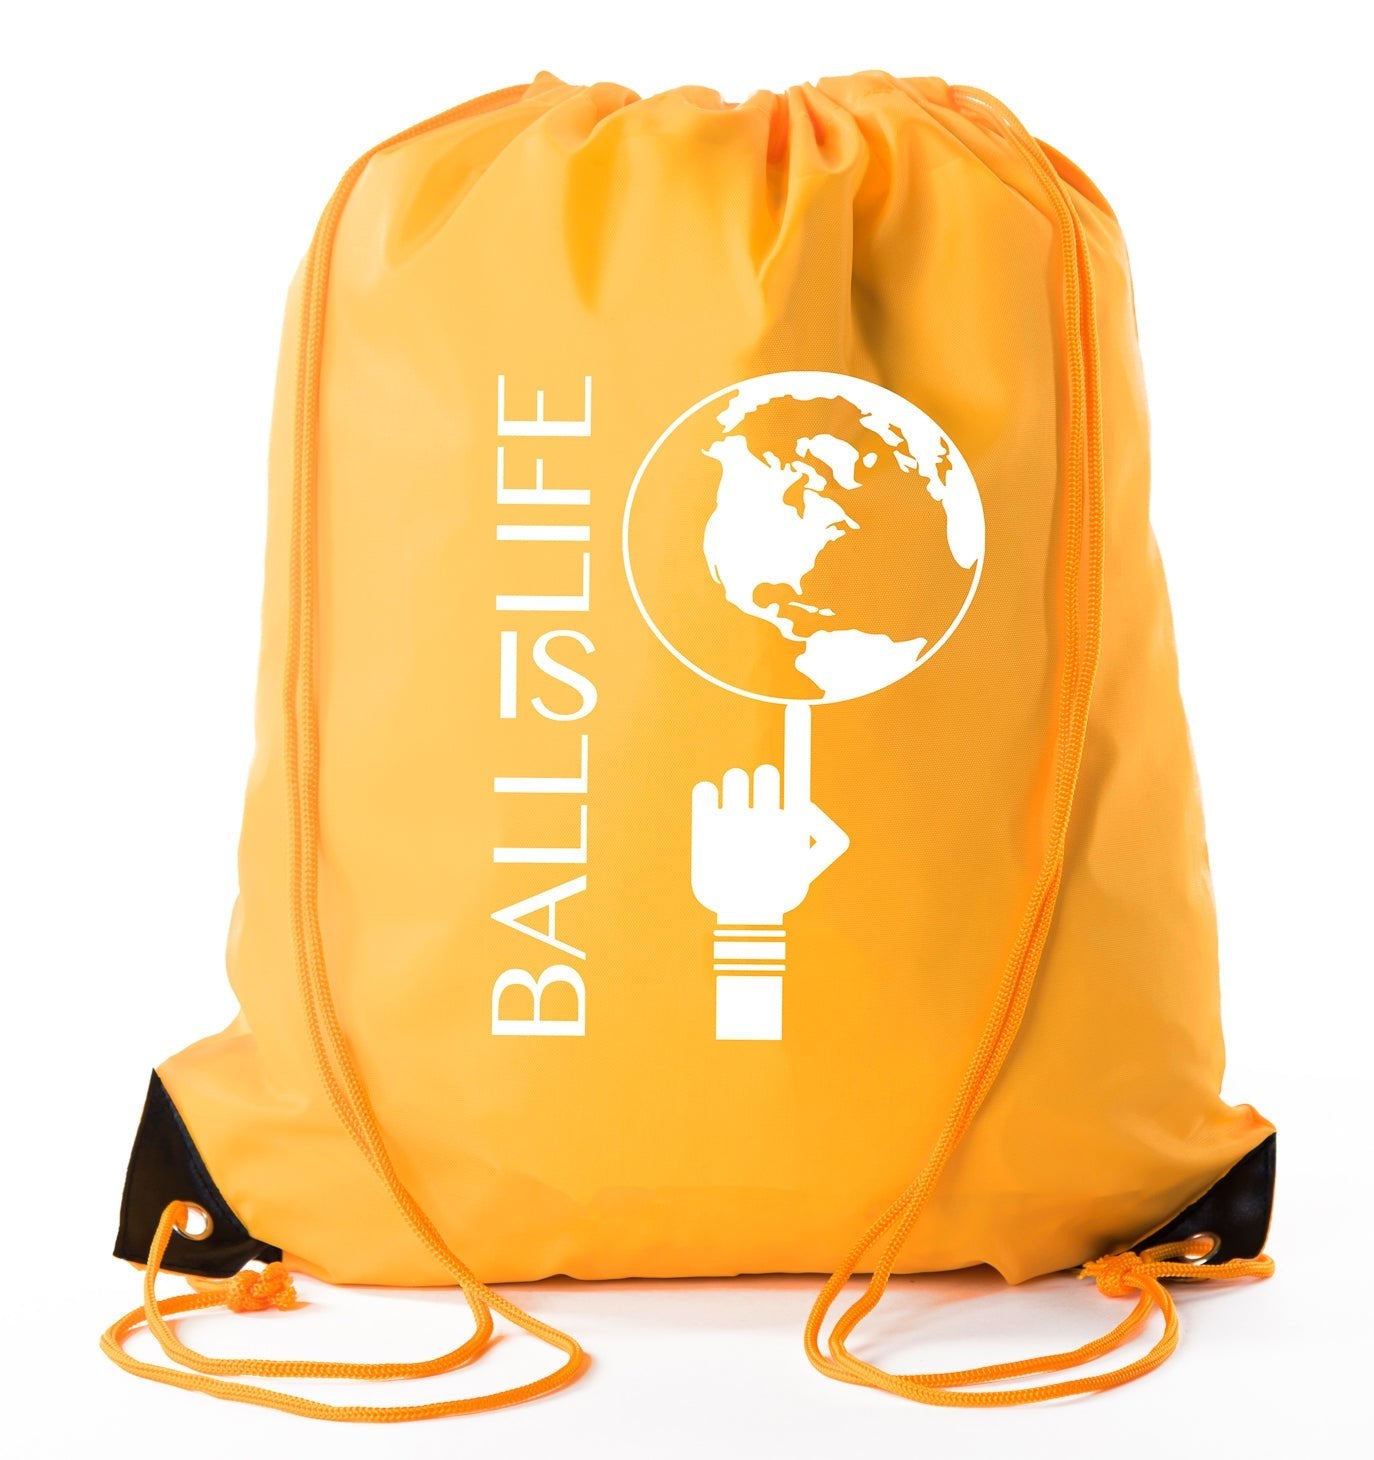 Accessory - Mato & Hash Basketball Drawstring Bags With 3,6, And 10 Pack Bulk Options - Ball Is Life